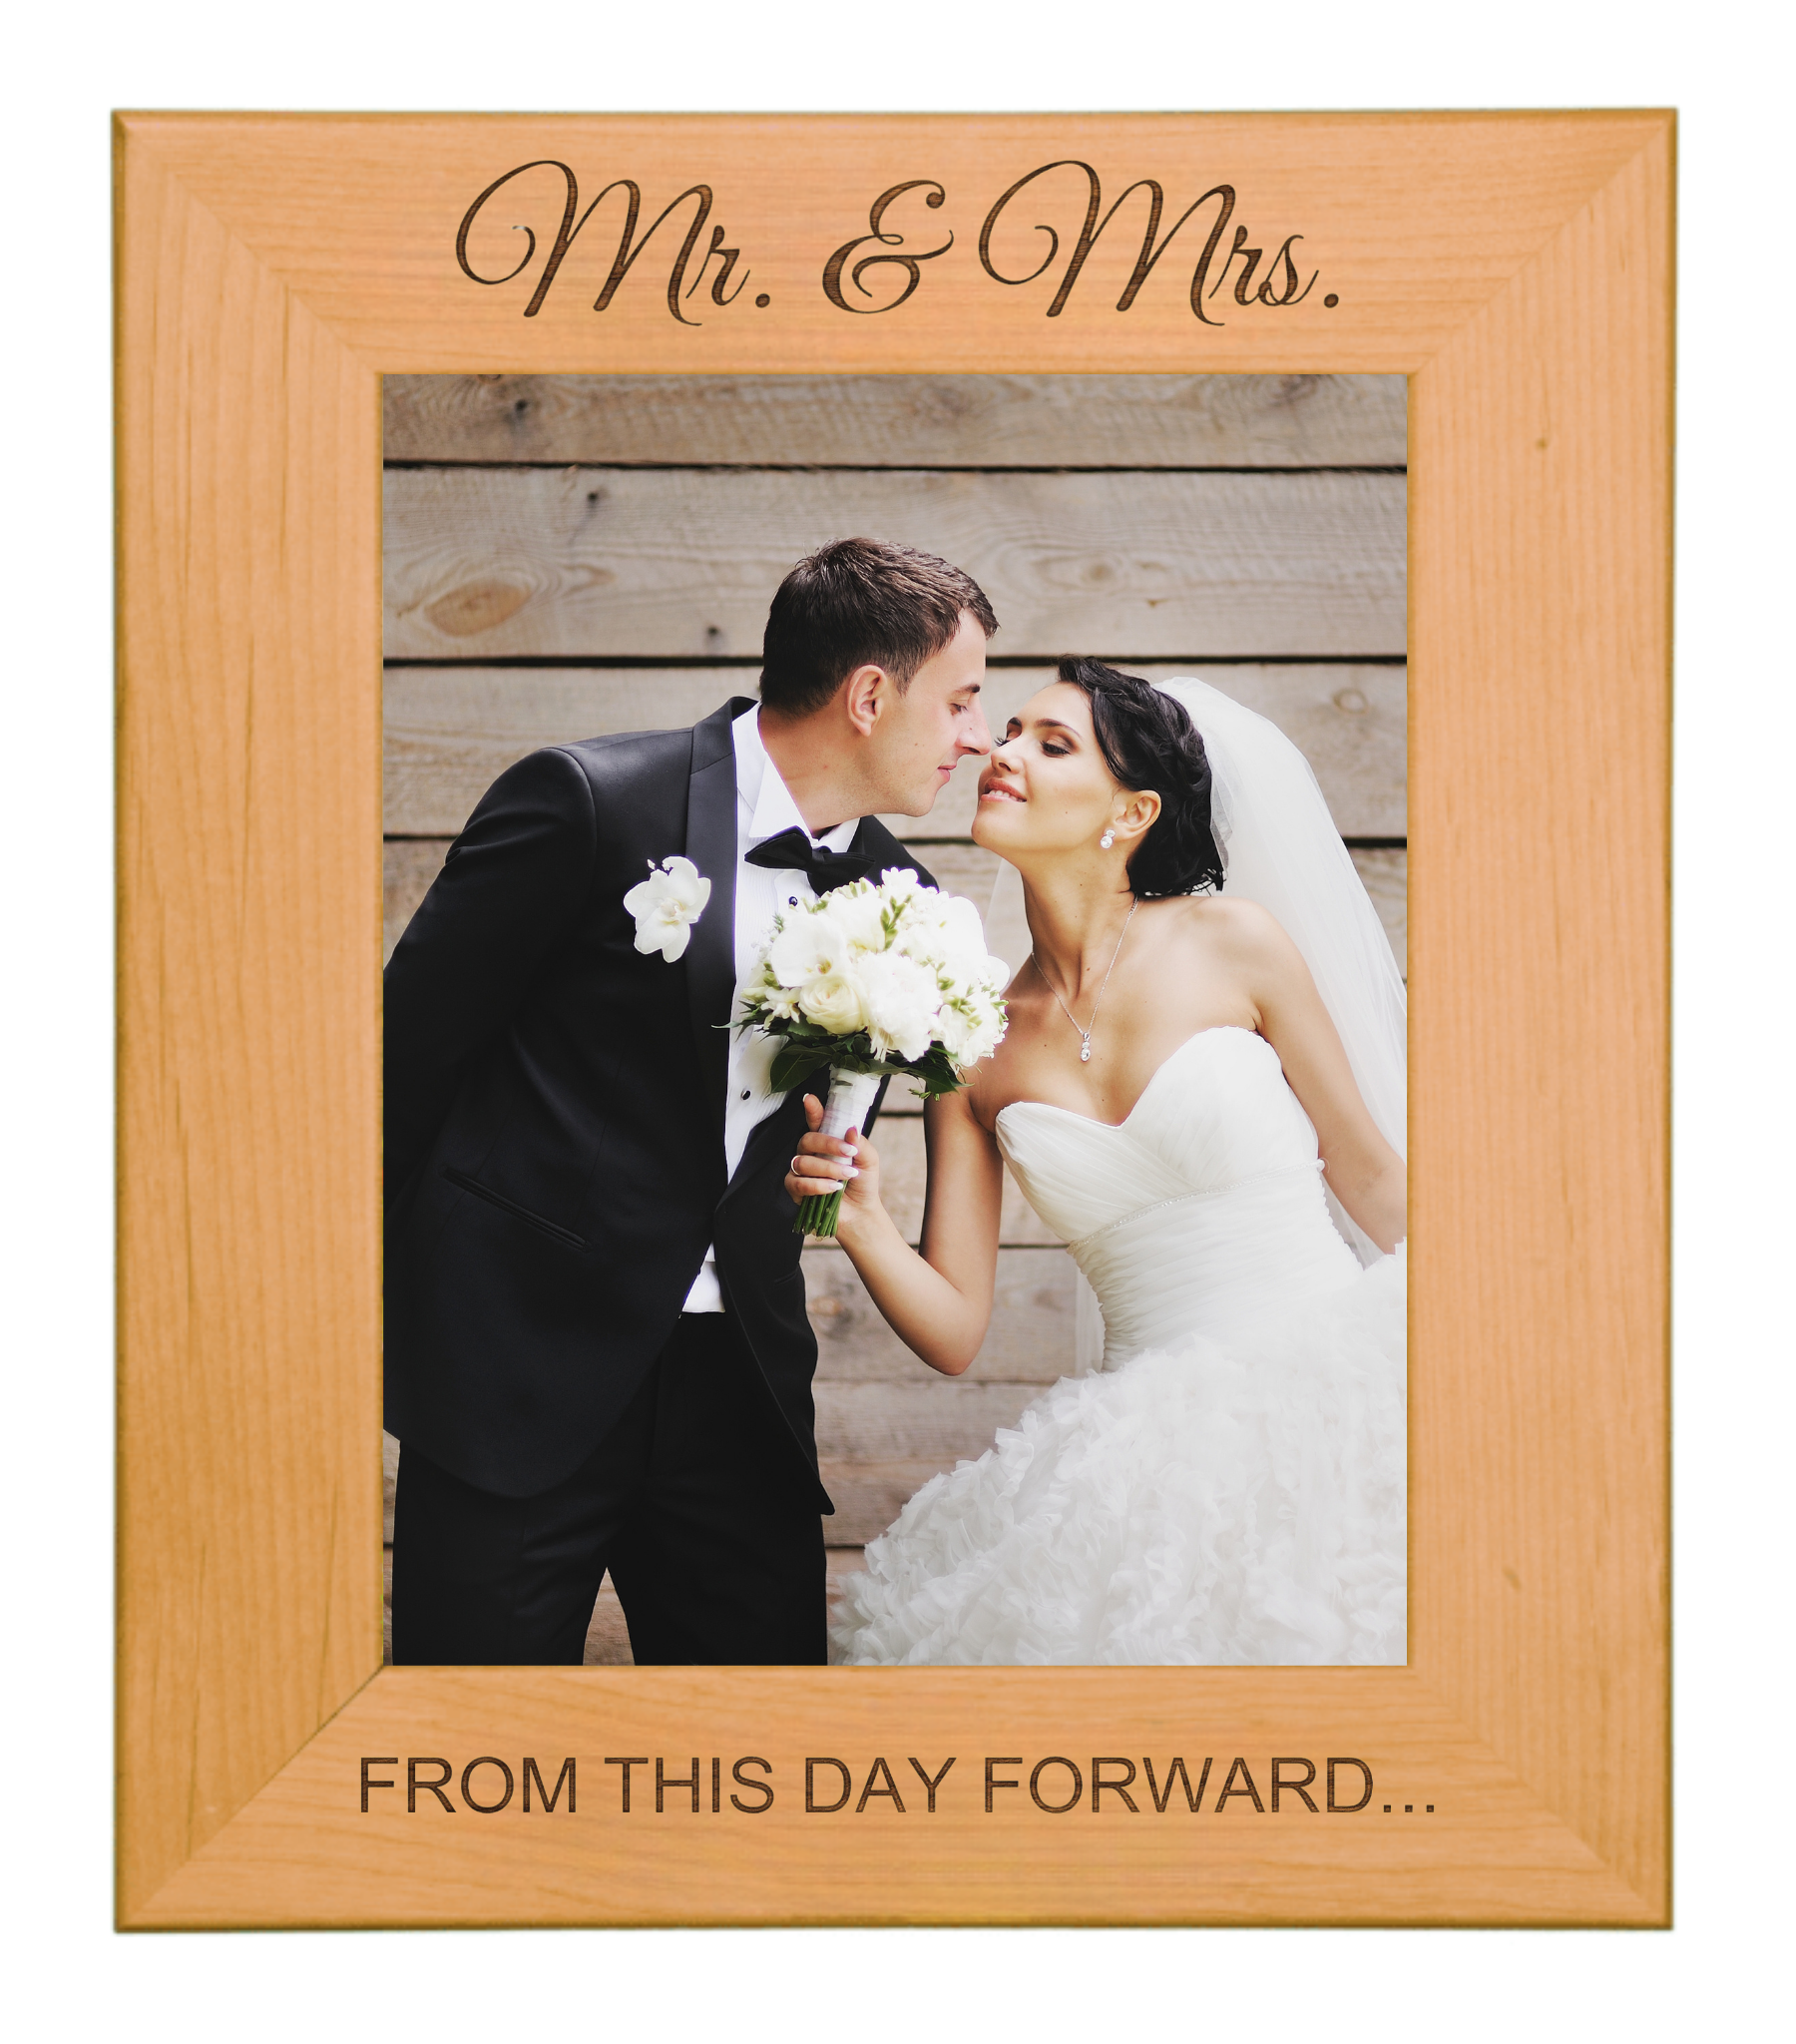 From this day forward - Wedding Personalized Wooden Photo Frame Custom Engraved - Red Alder Genuine Walnut Photo Frame